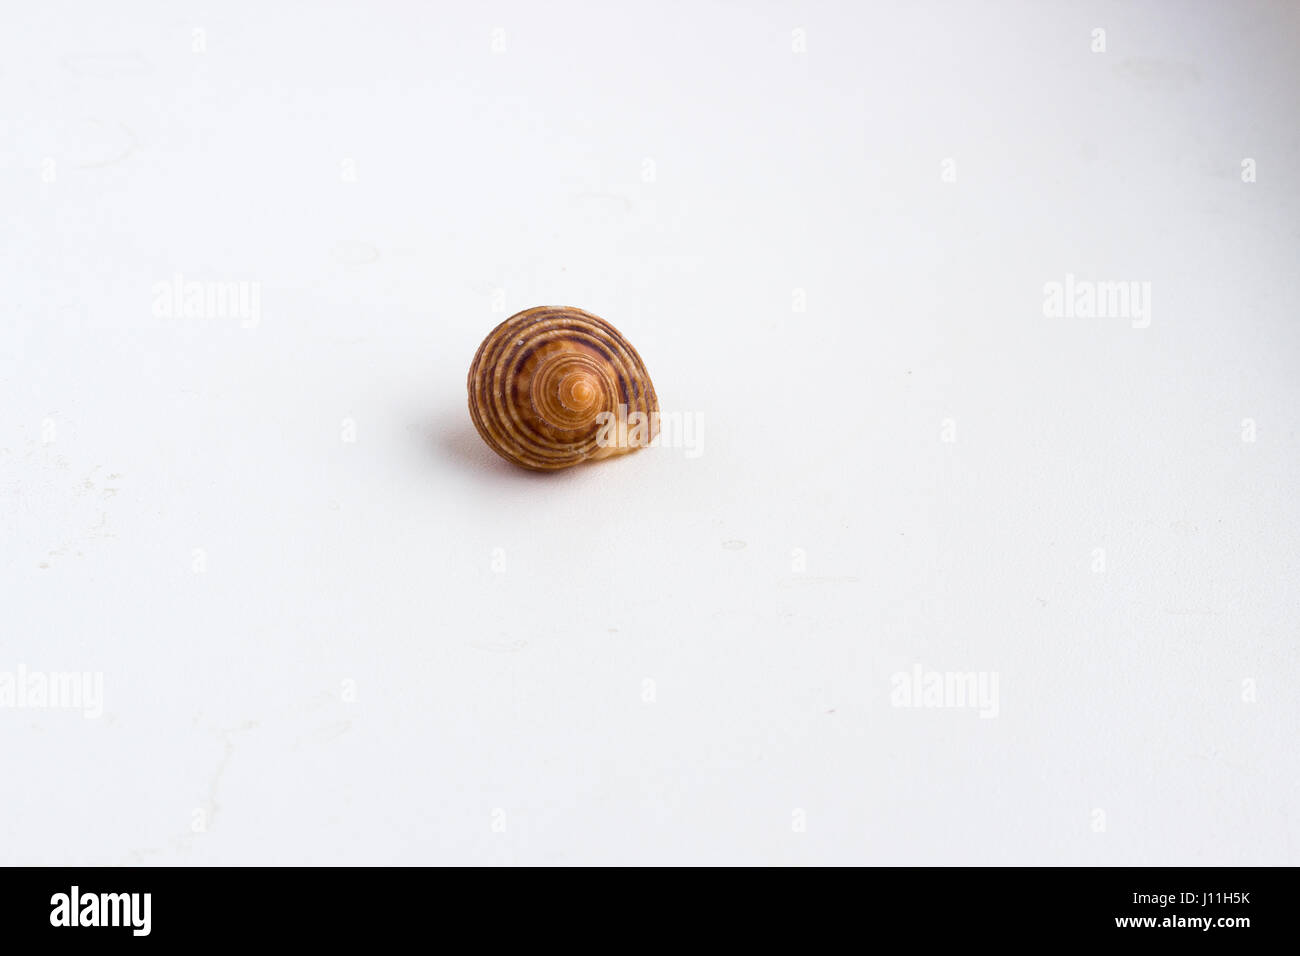 Beautiful sea shell shot close on a white background, from a private collection of sea and ocean shells Stock Photo